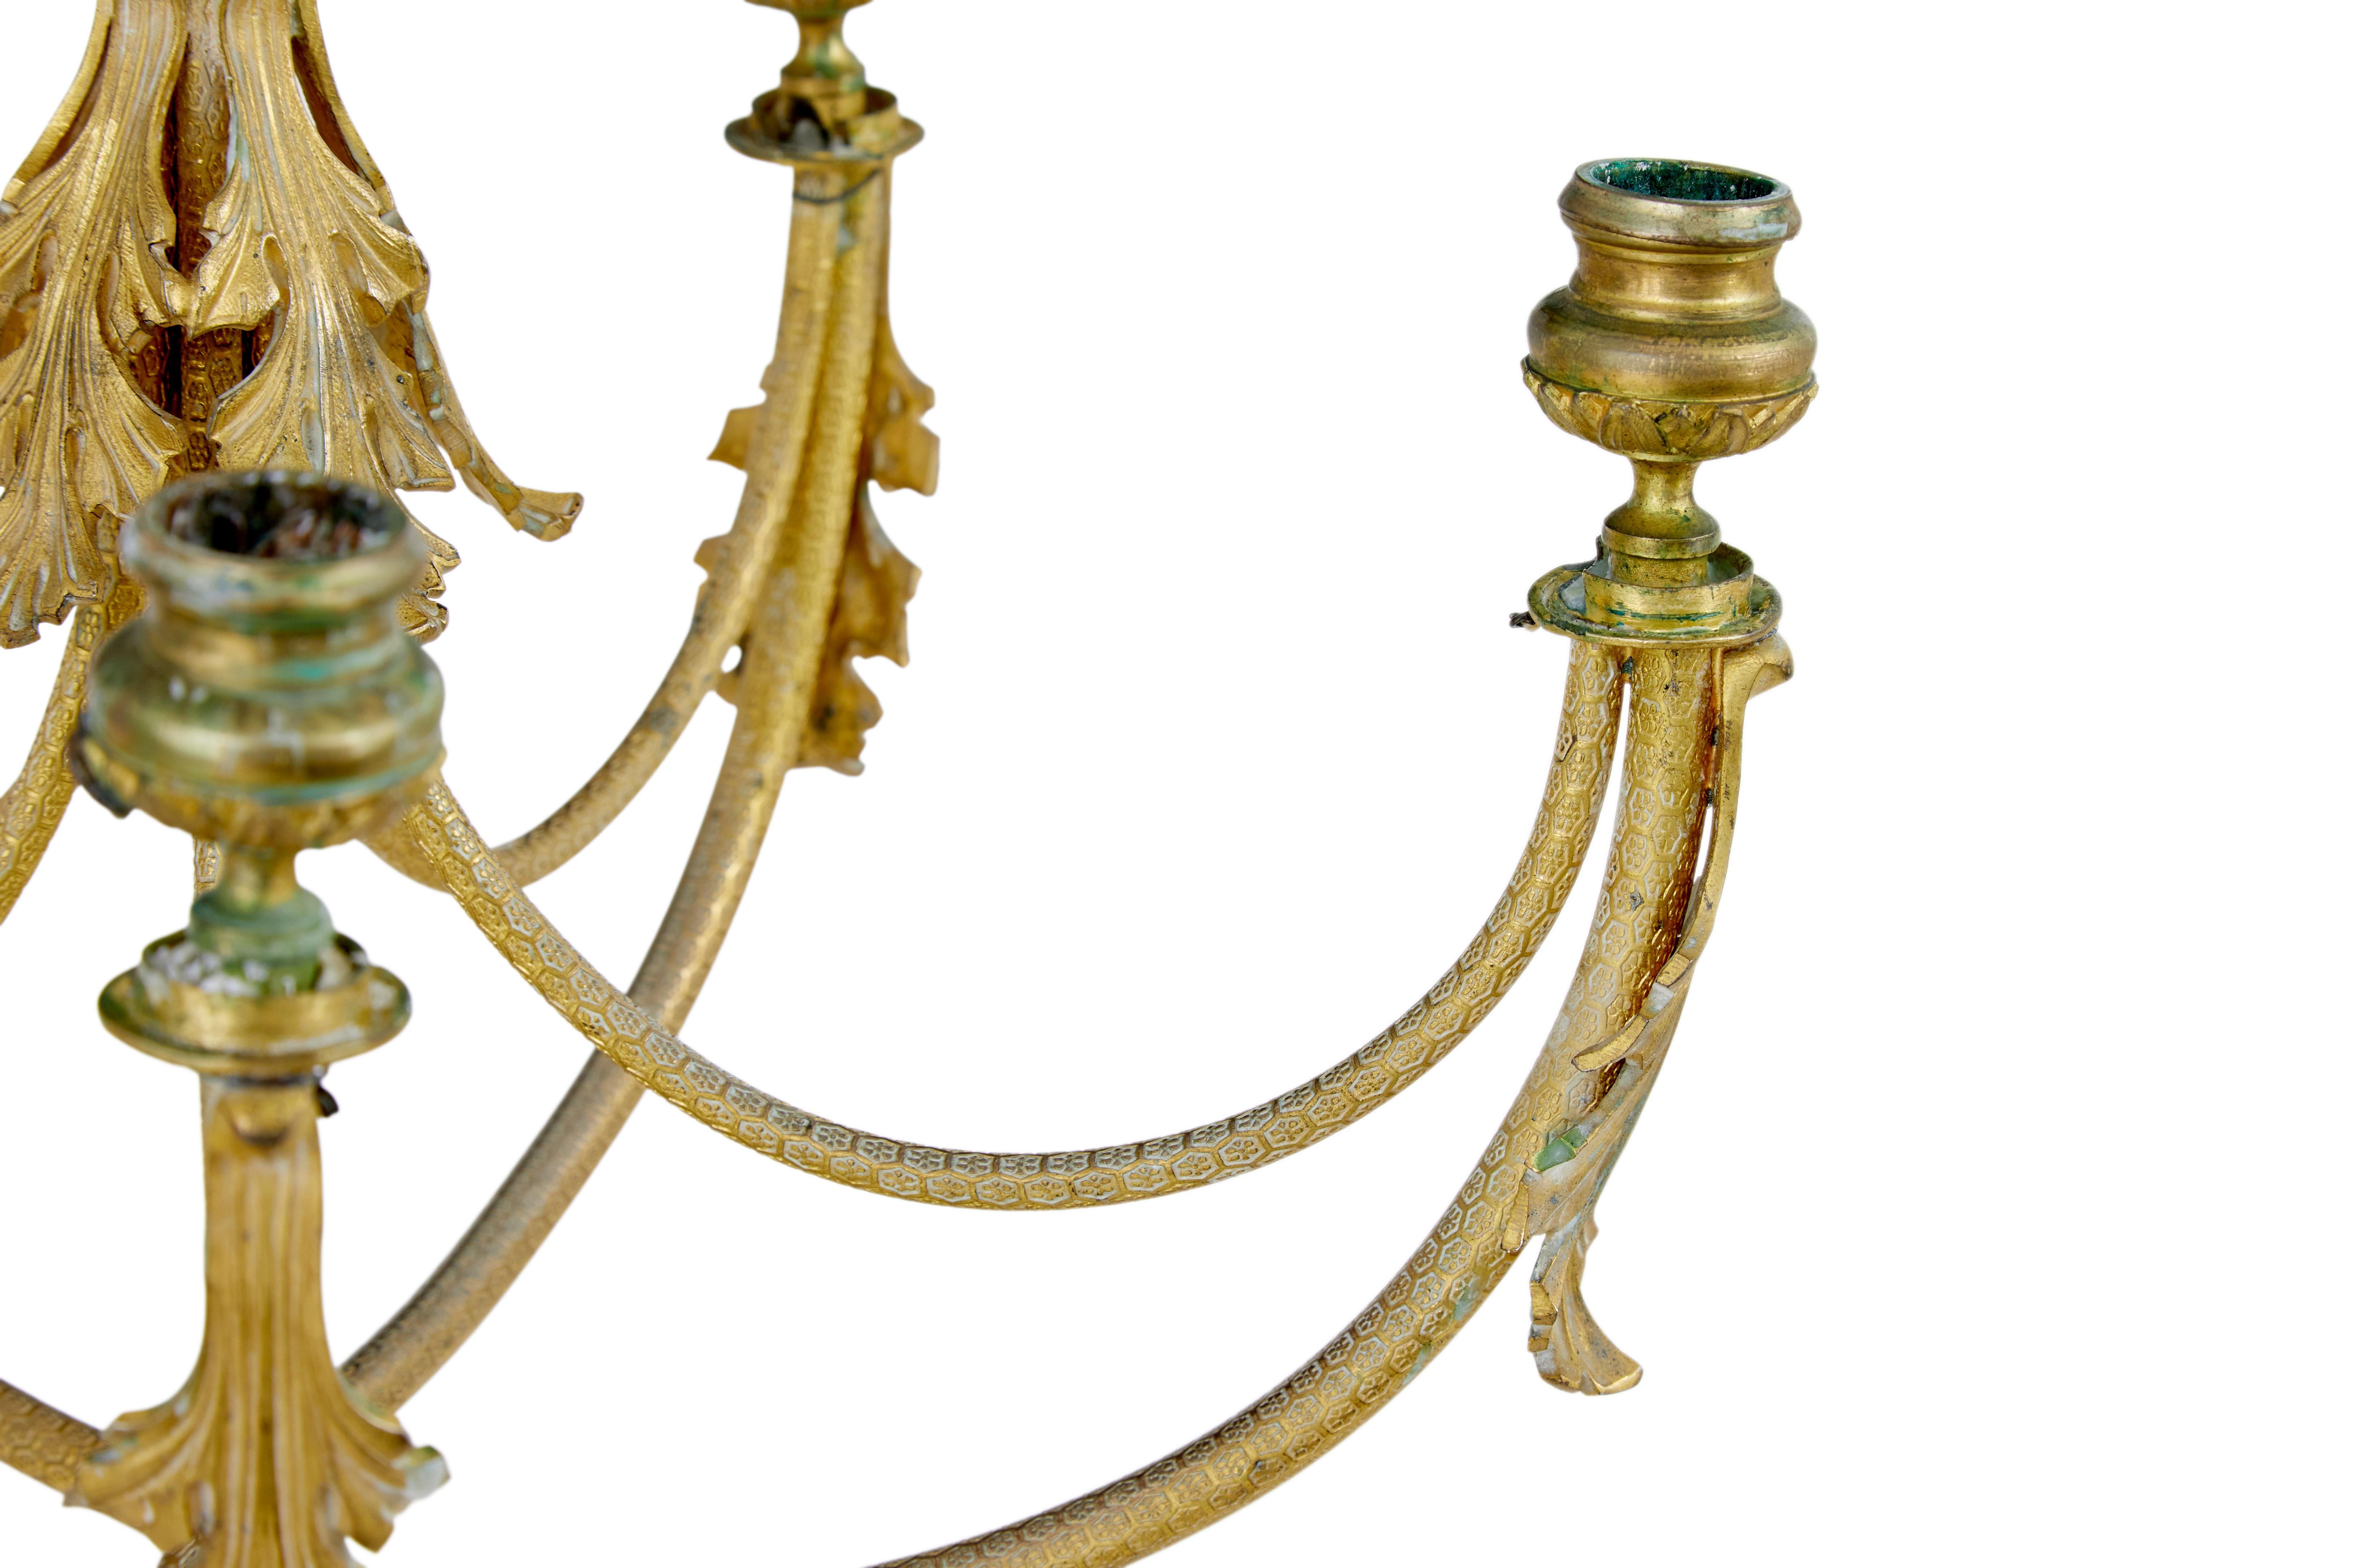 19th Century 19th century French ormolu six-candle candelabra For Sale